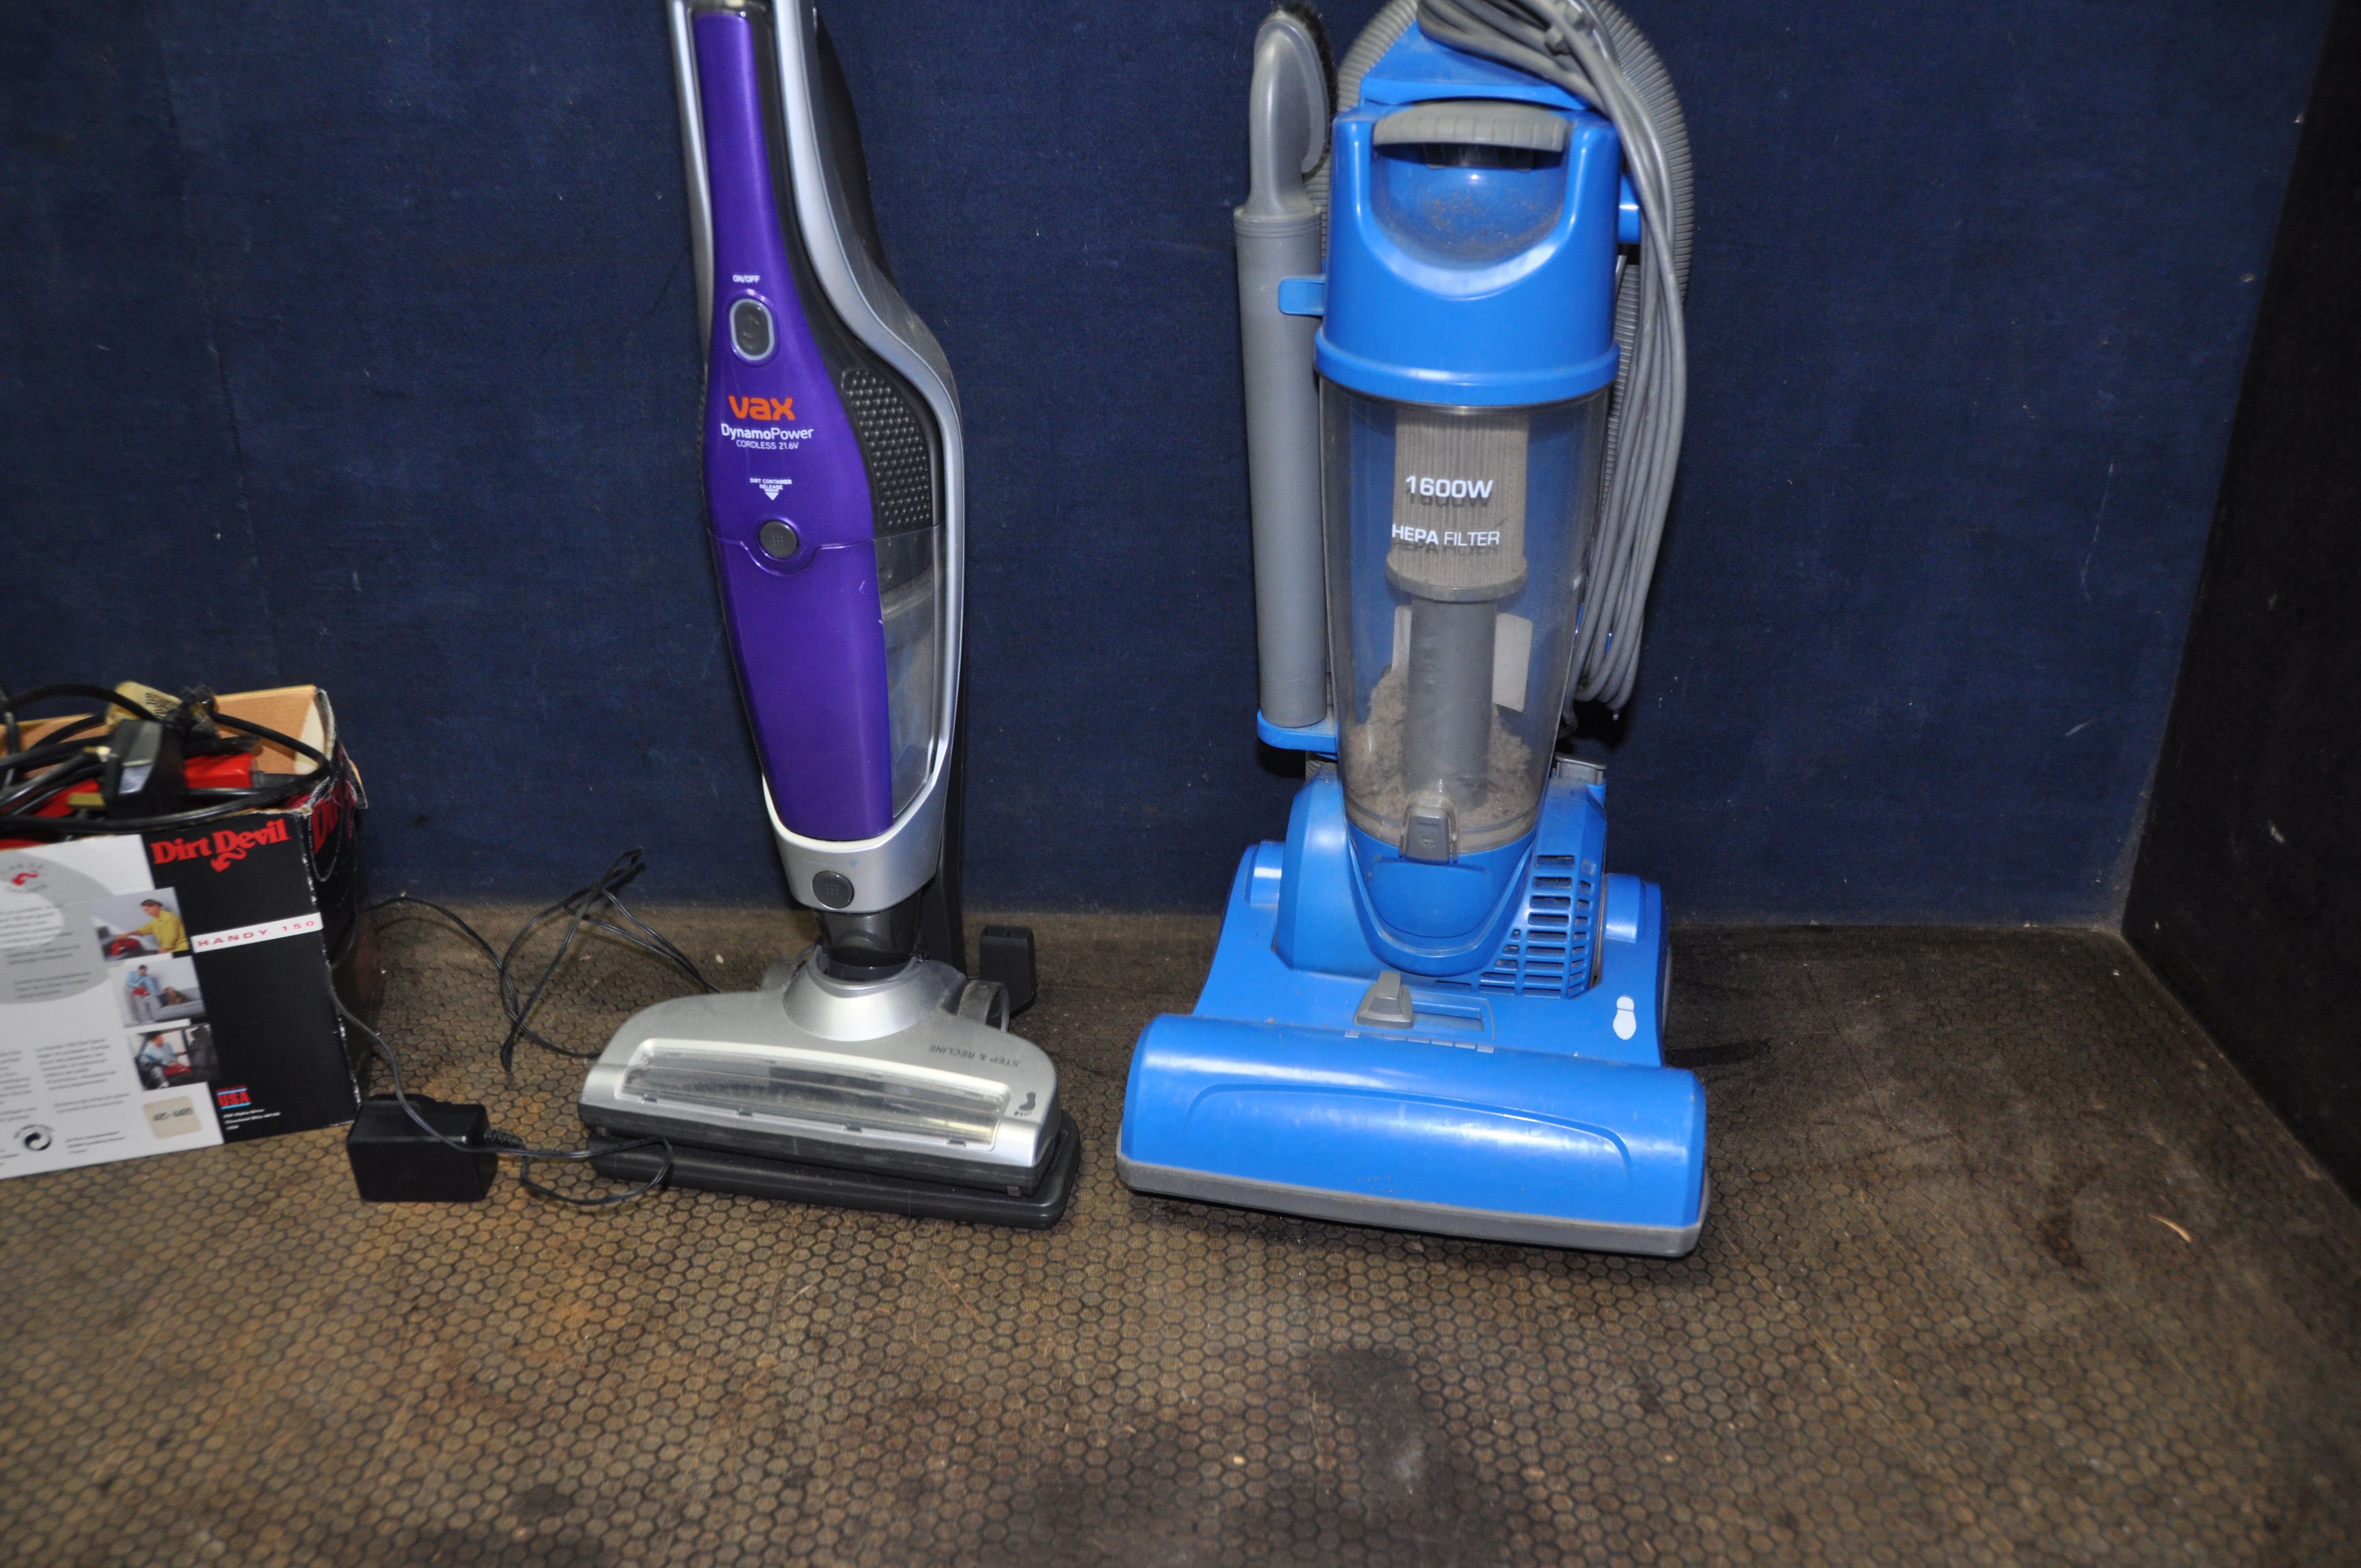 AN ARGOS UPRIGHT VACUUM CLEANER, a Dirt Devil handheld vacuum cleaner, a Prem I Air heated towel - Image 2 of 3